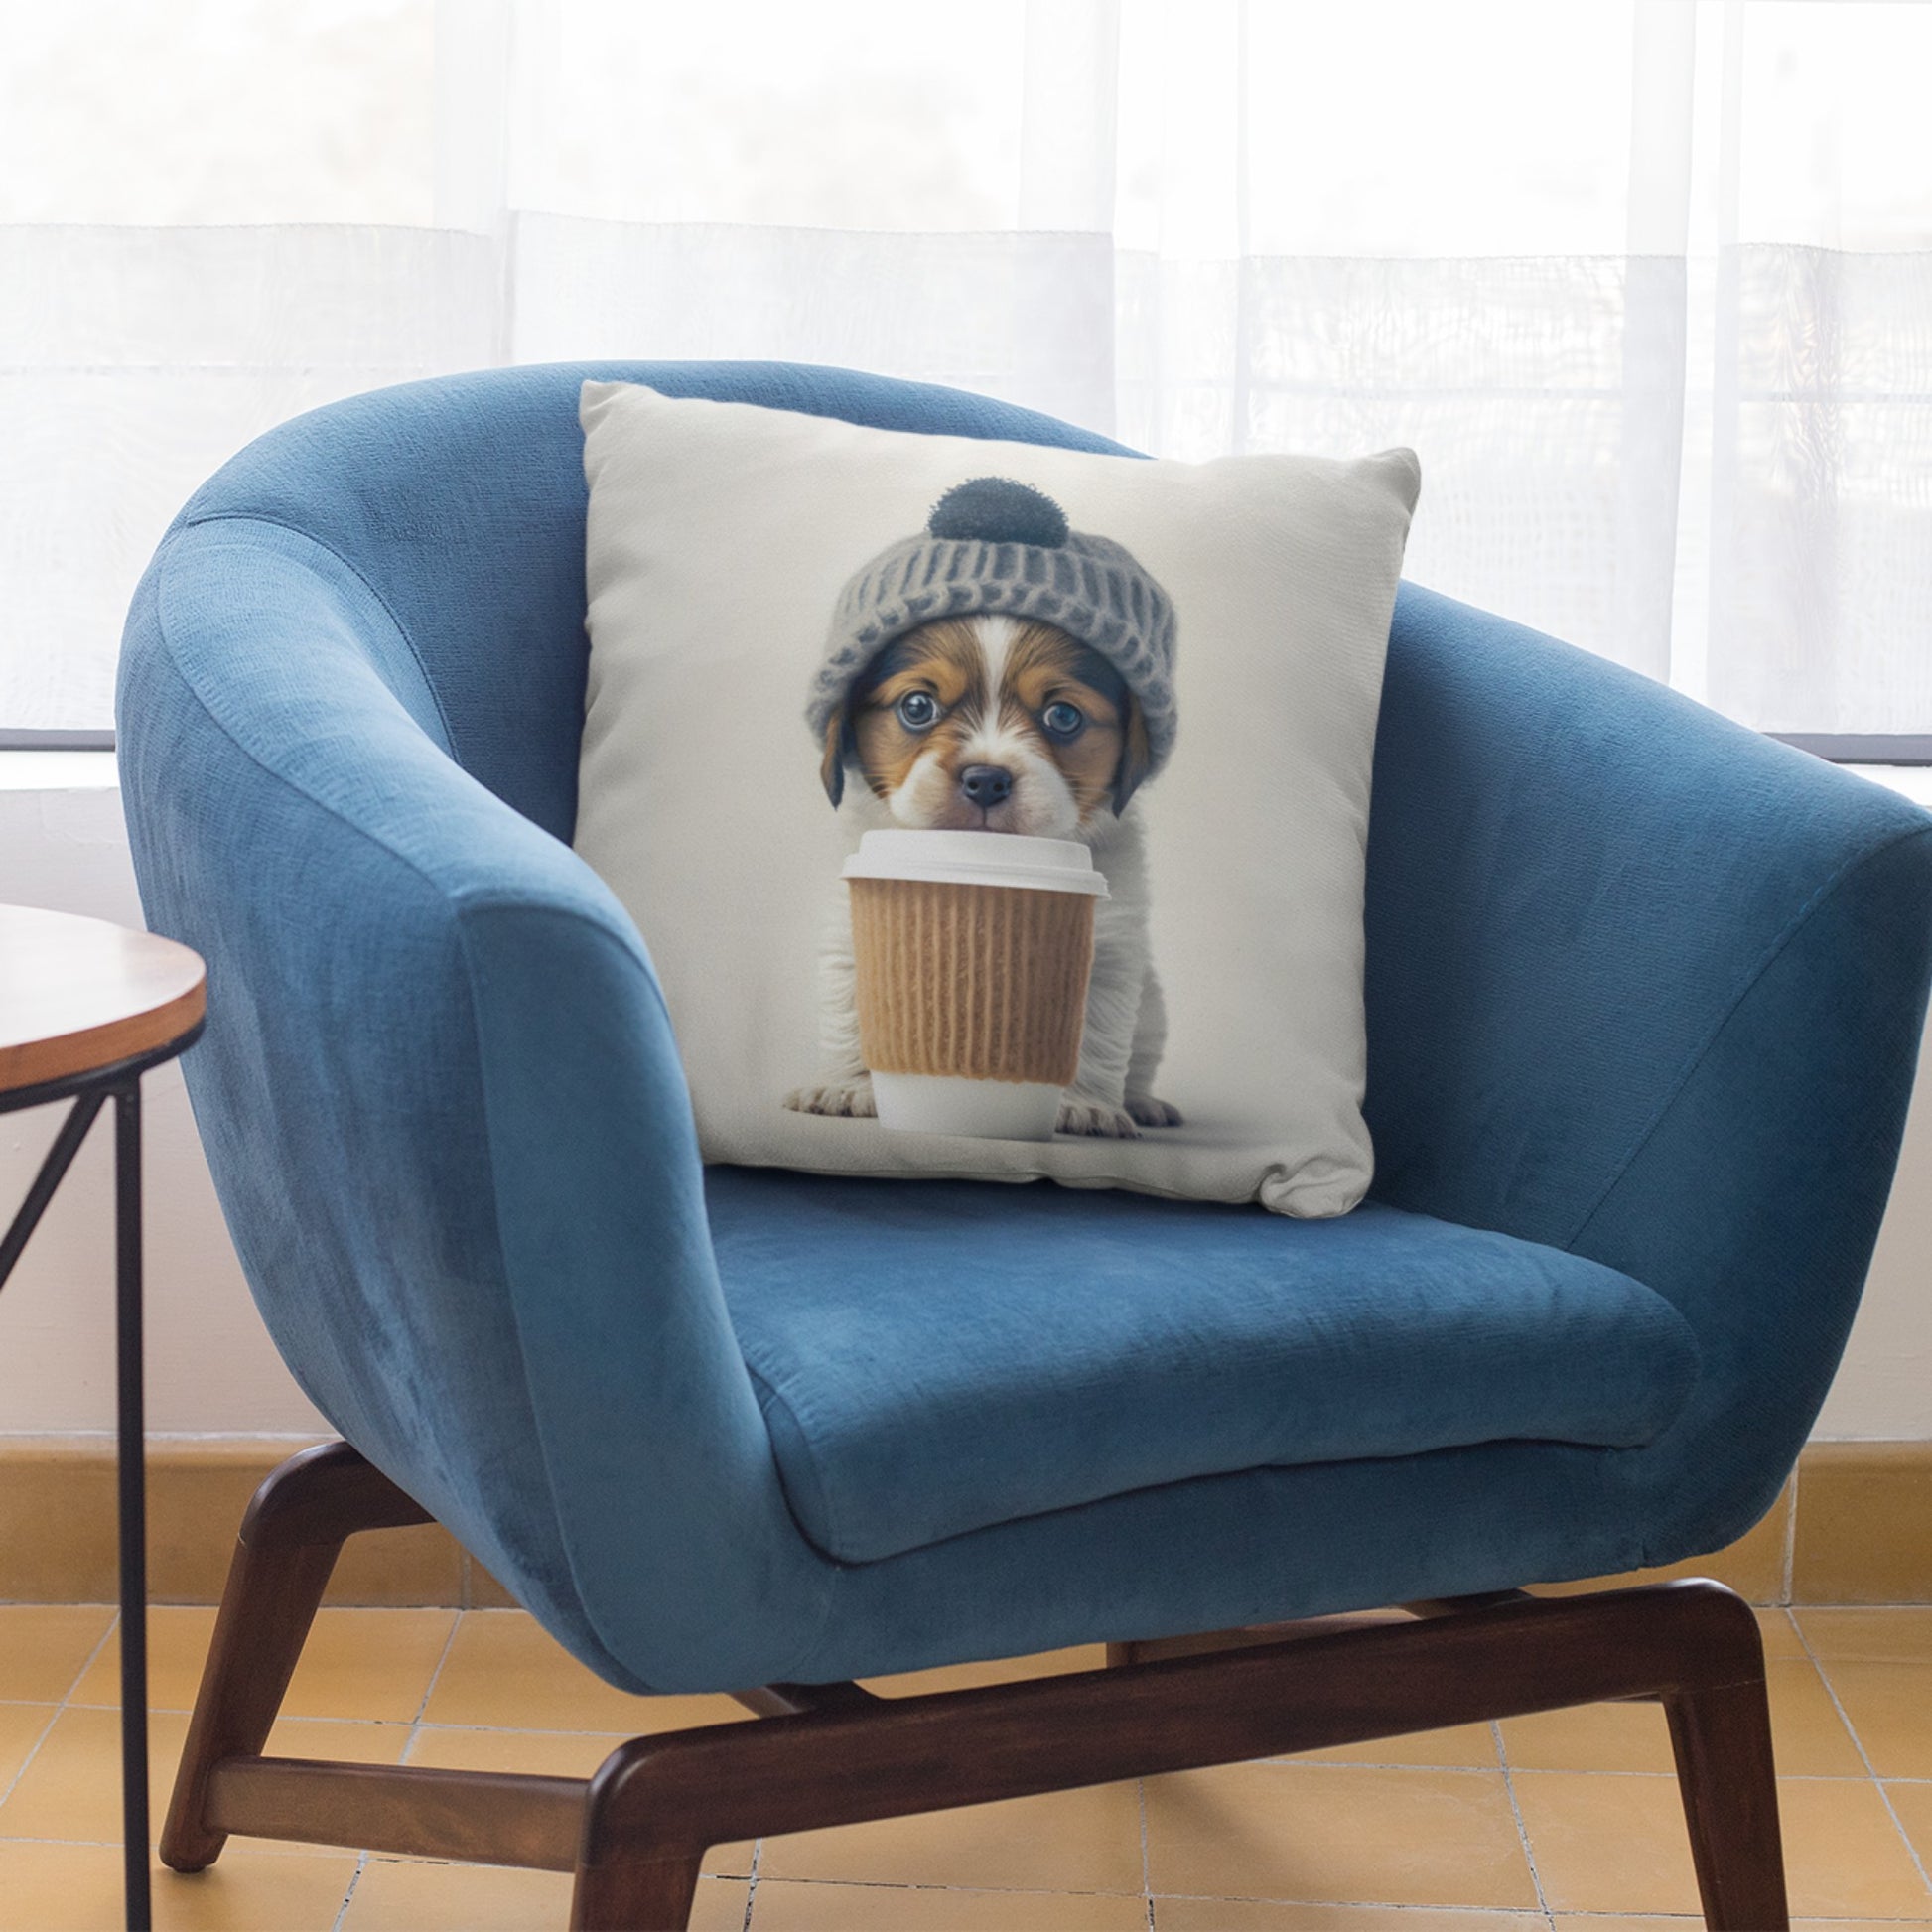 Cozy Pillow with Cute Puppy and Coffee Cup Design